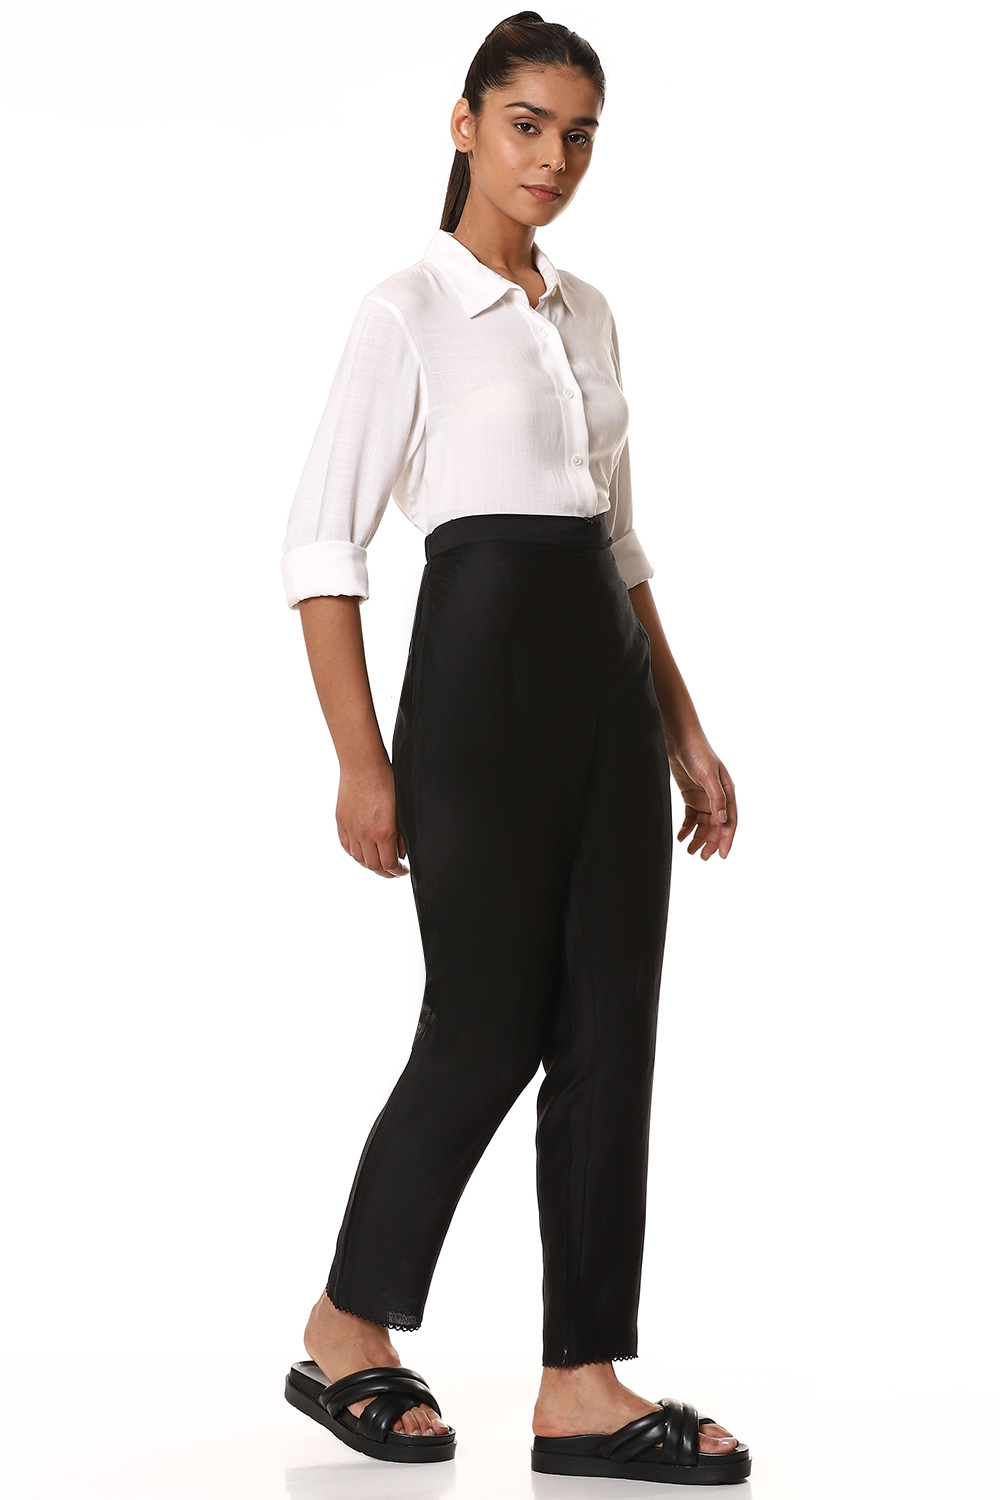 Buy W for Woman Black Knitted Women's Straight Pants_22NOW62077-218386_S at  Amazon.in